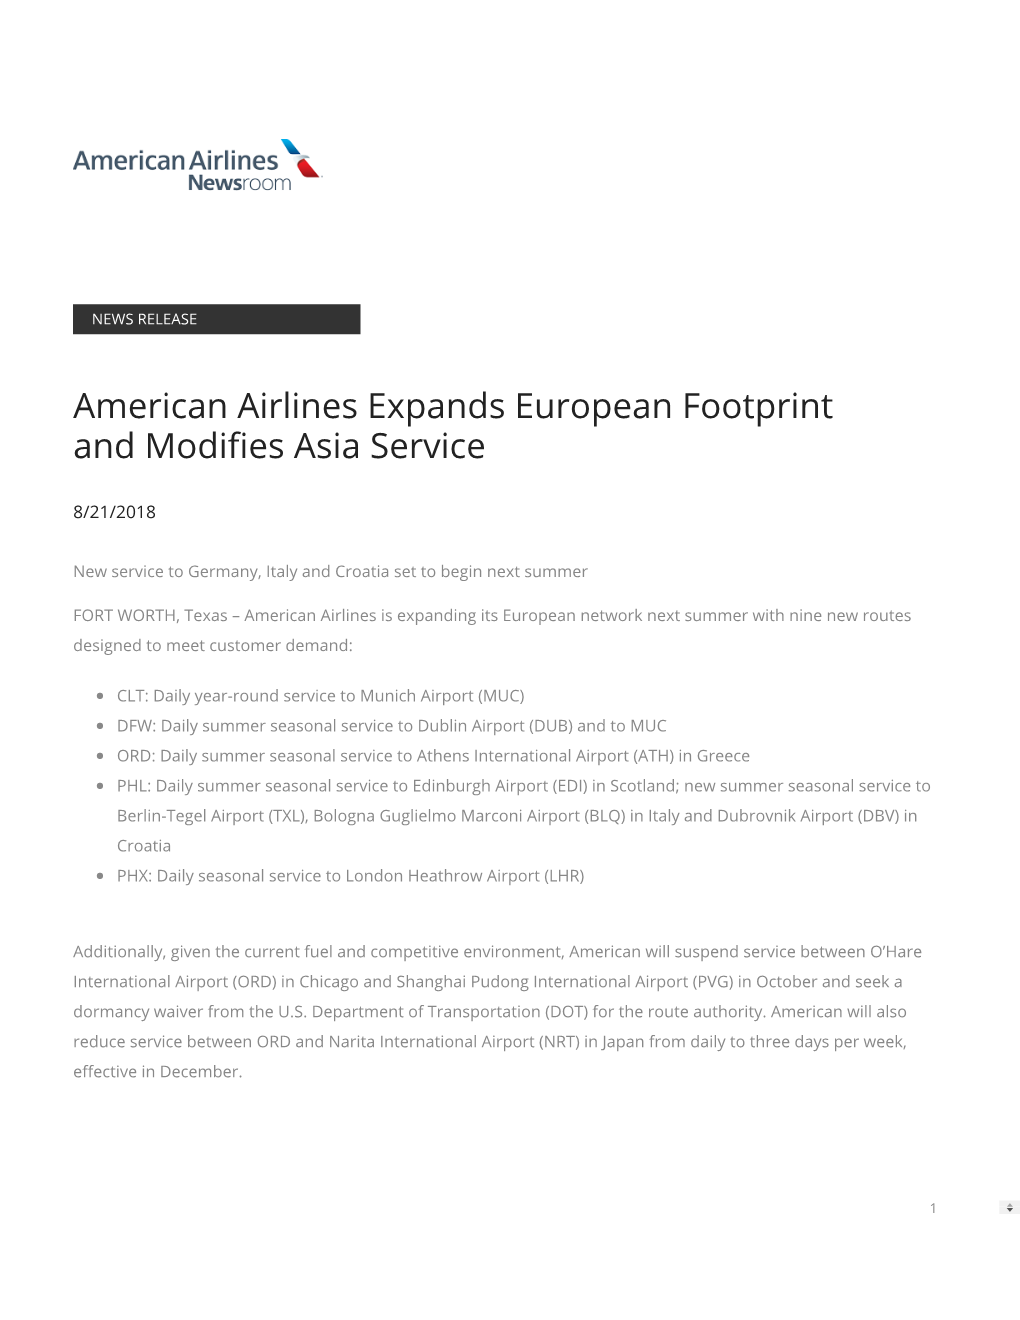 American Airlines Expands European Footprint and Modi Es Asia Service